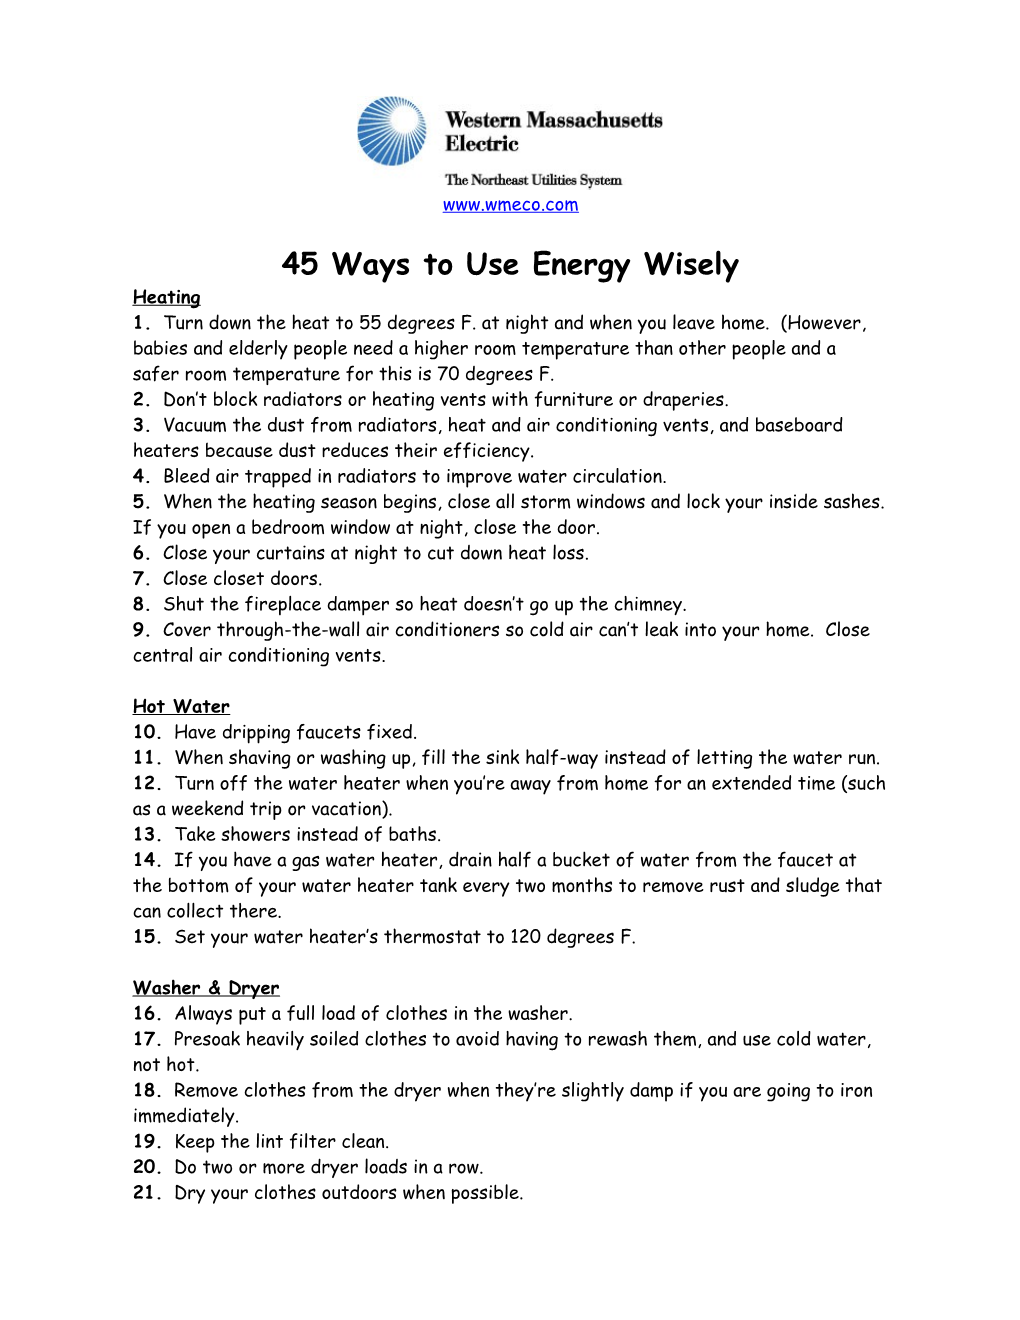 45 Ways to Use Energy Wisely